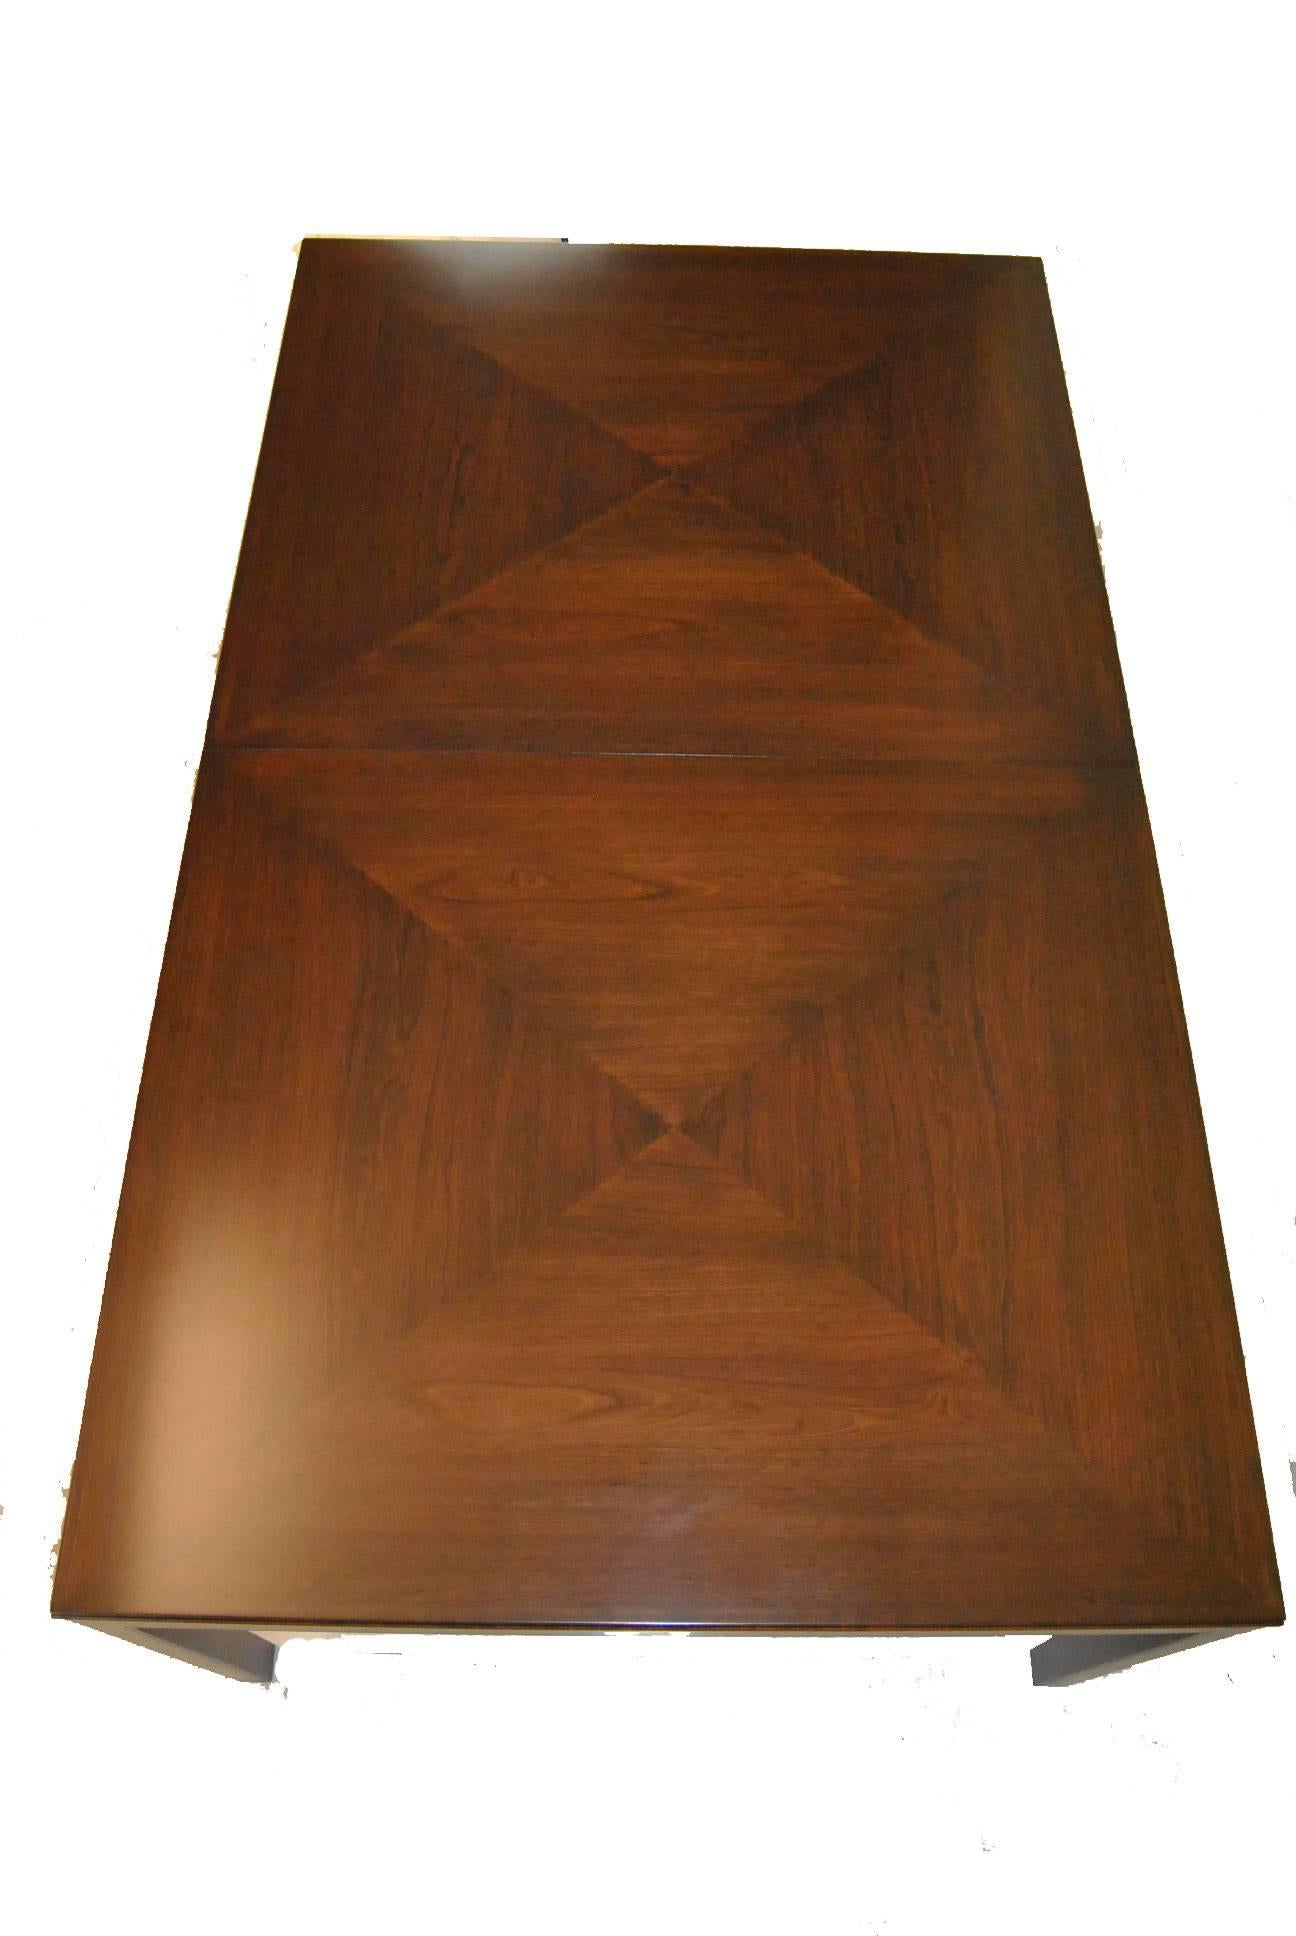 A great Mid-Century Modern dining room table by Bert England for Johnson Furniture. It has drop-down centre legs for stability when the leaves are in place, which then fold under the table to conceal when not in use. The original label is on the